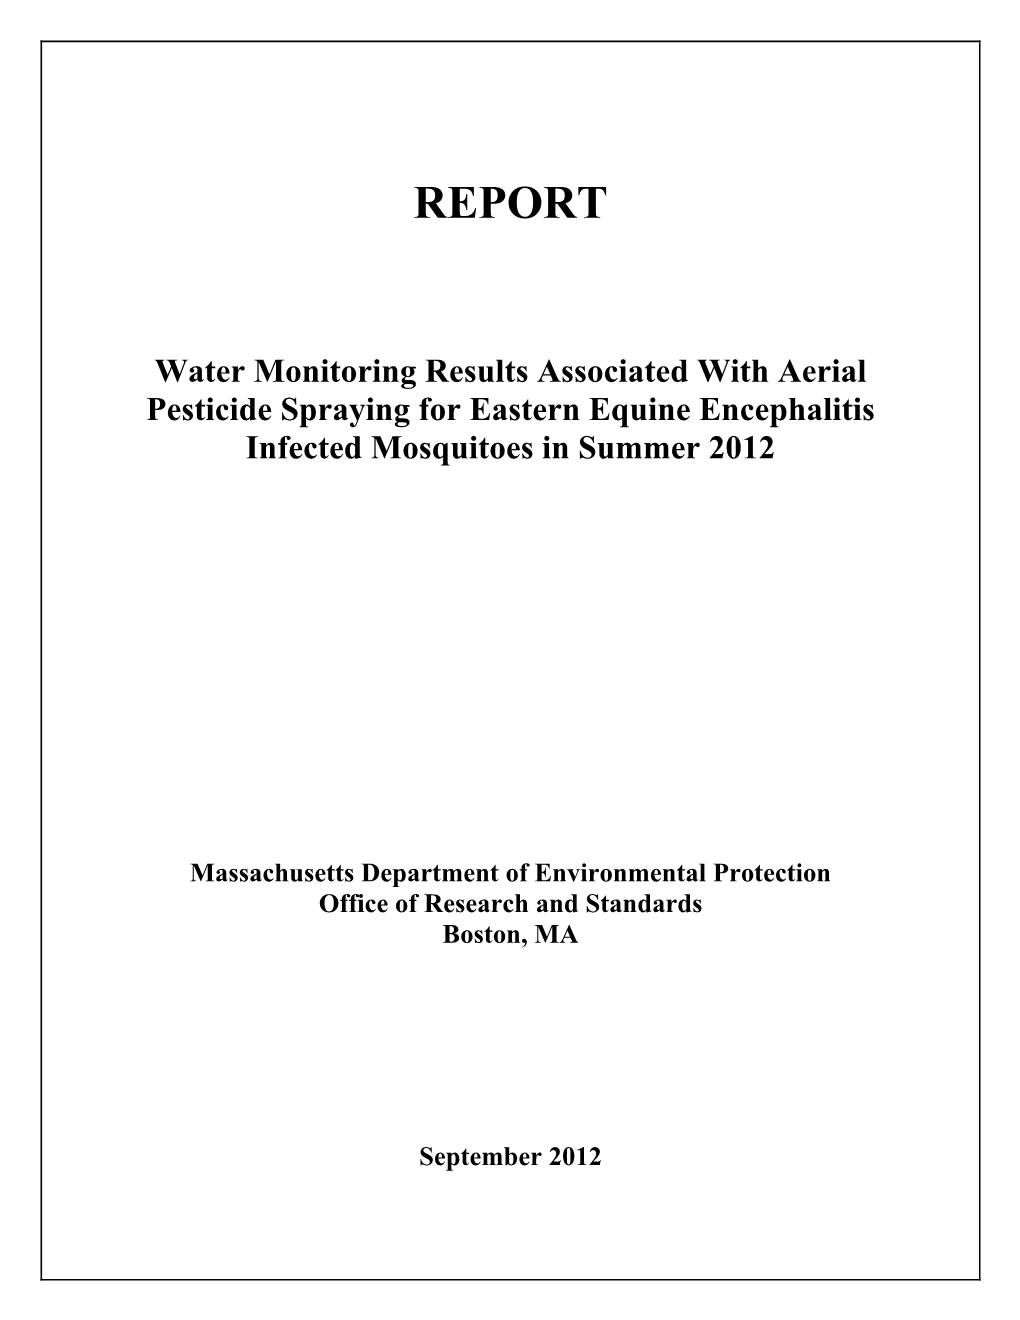 See the Post-Spray Monitoring Report